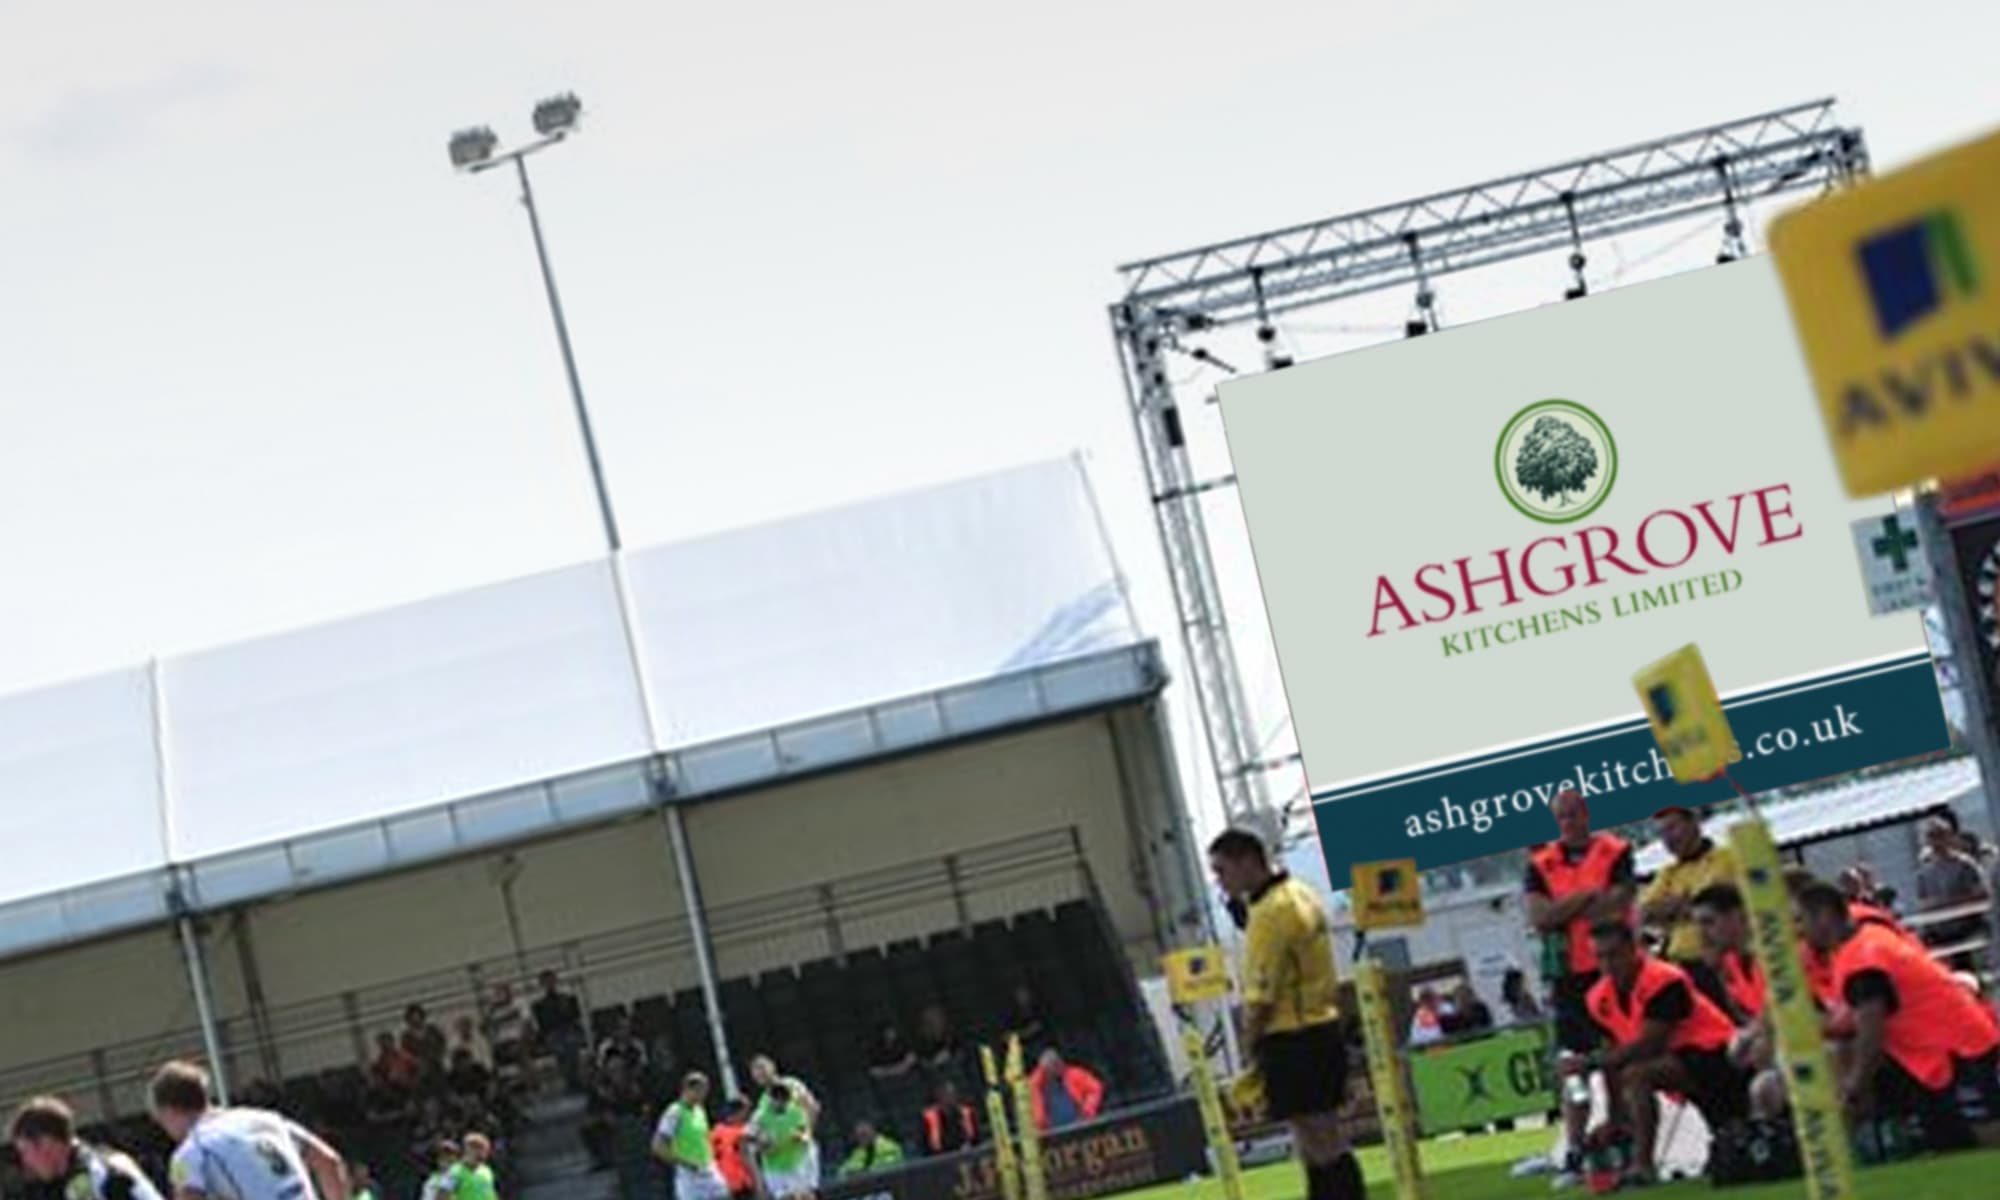 Ashgrove Kitchens Promotional Advertising Video at Exeter Chiefs Rugby Ground